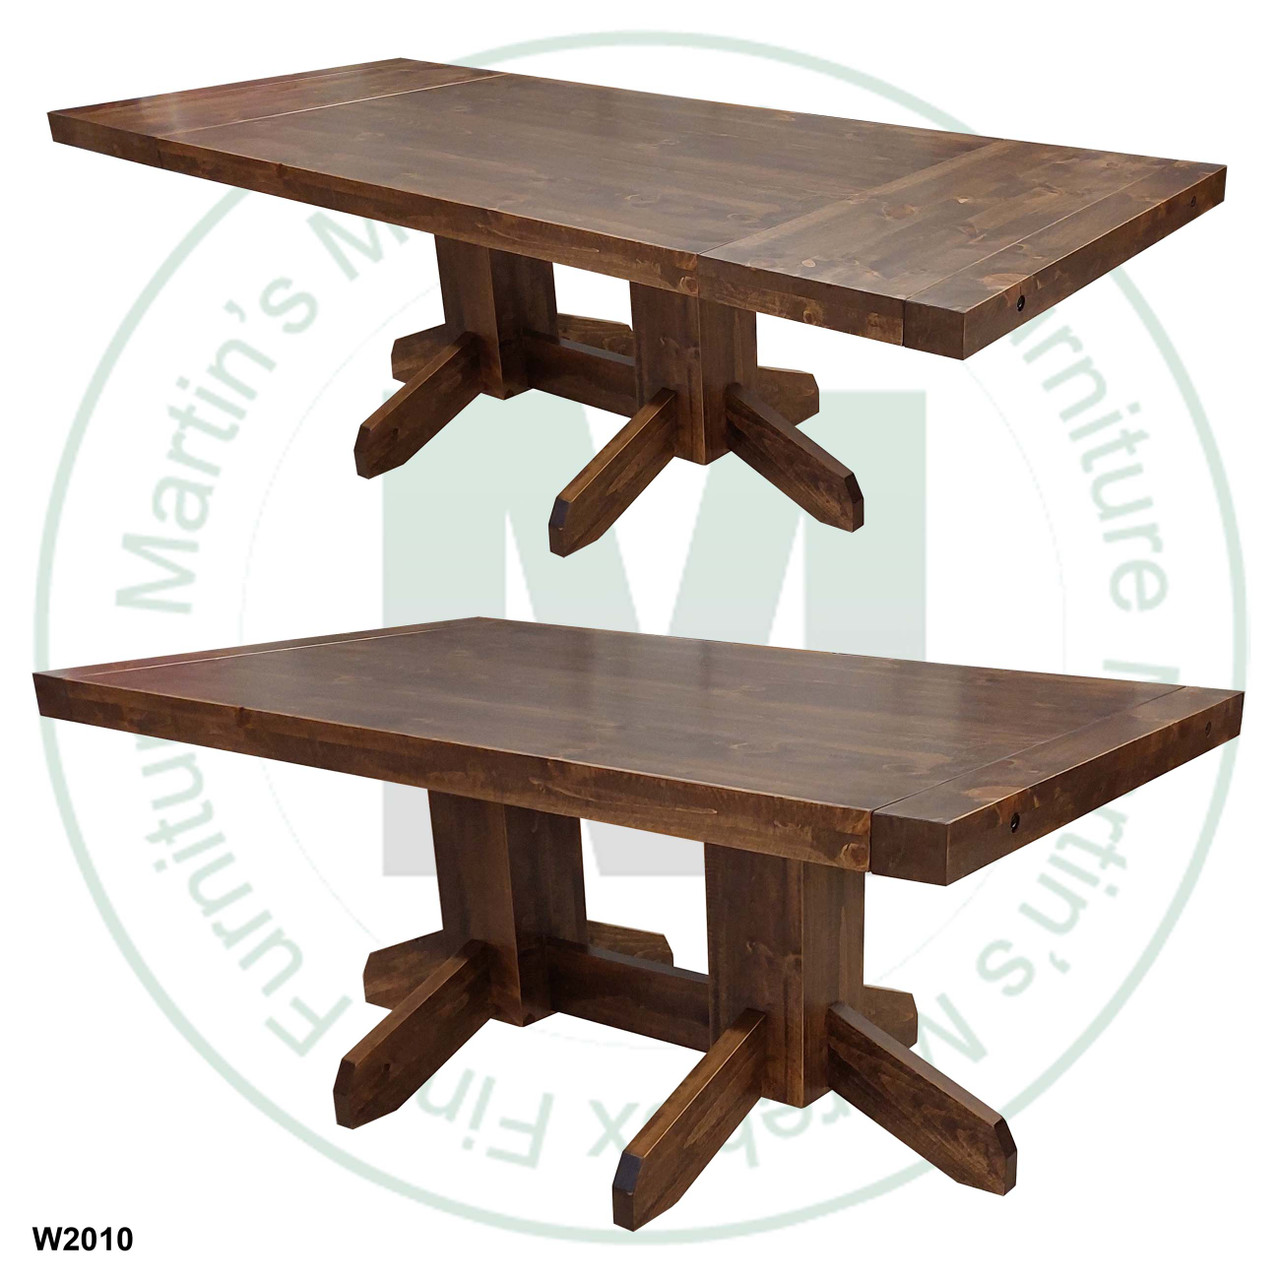 Maple Yukon Solid Top Double Pedestal Table 48'' Deep x 120'' Wide x 30'' High With 2 - 16'' End Leaves